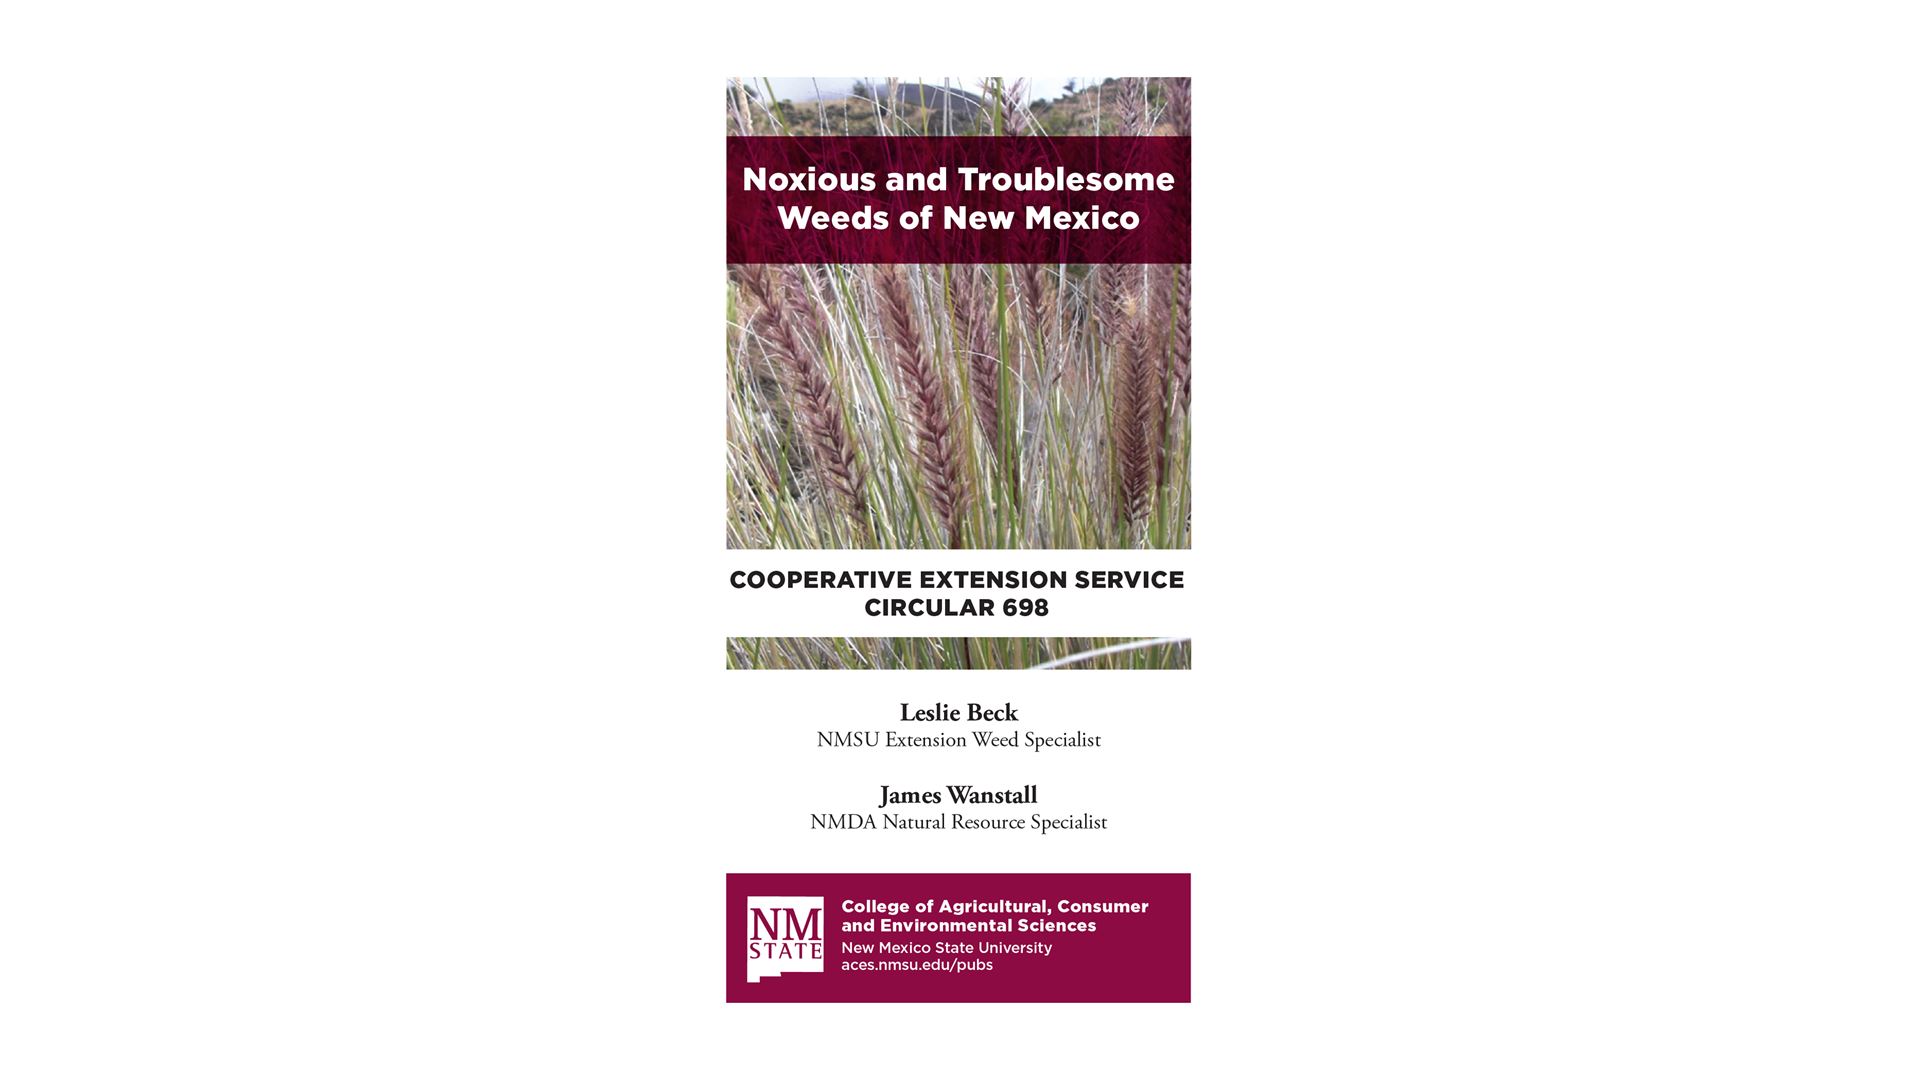 Third edition of NMSU’s Extension troublesome weeds publication now available